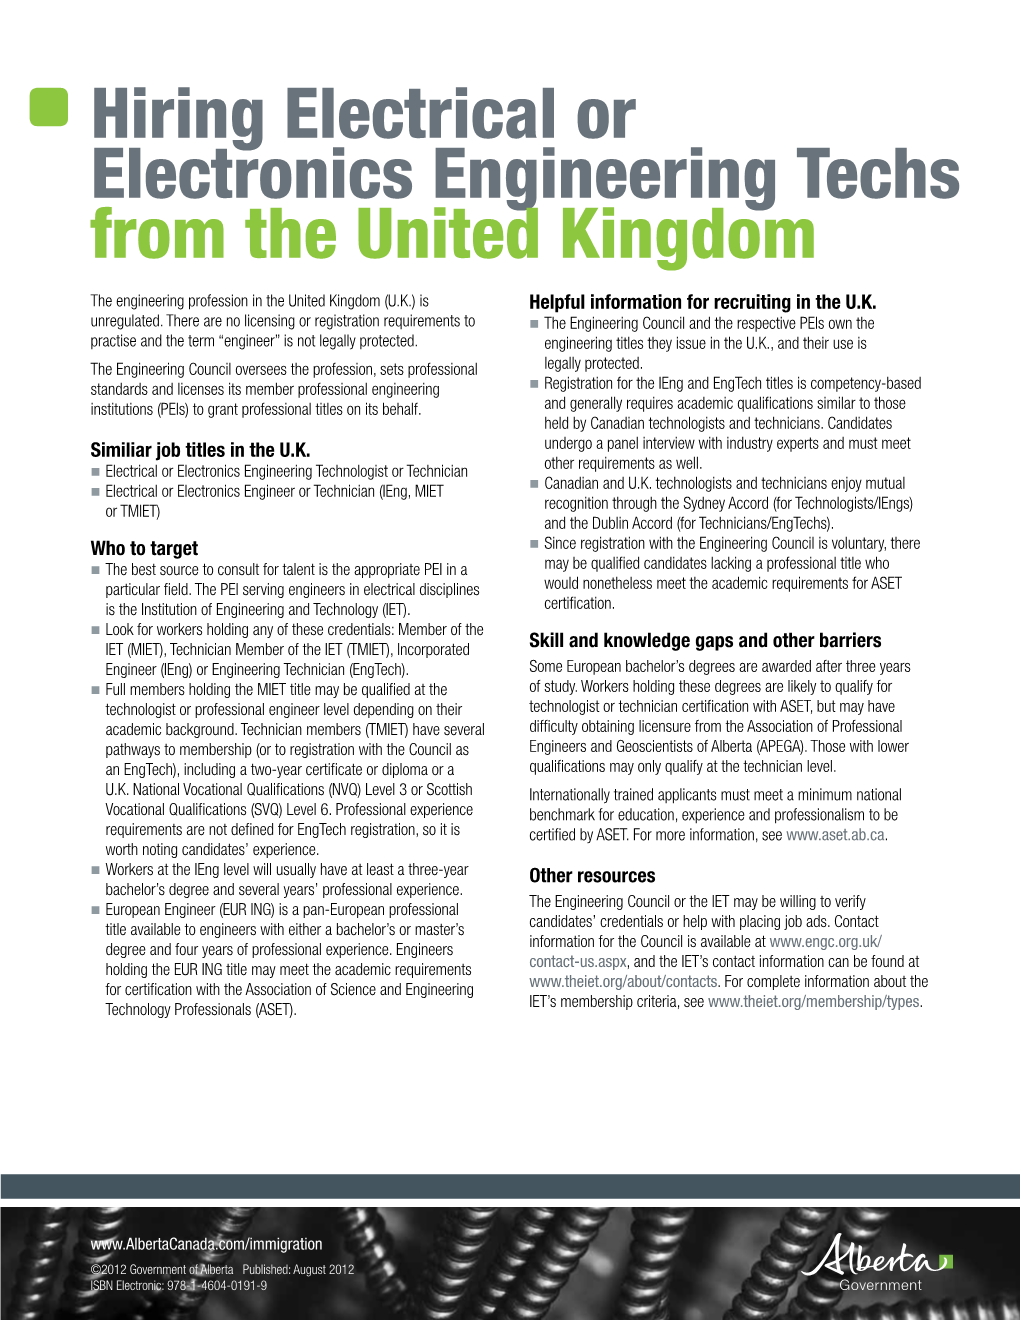 Hiring Electrical Or Electronics Engineering Techs from the United